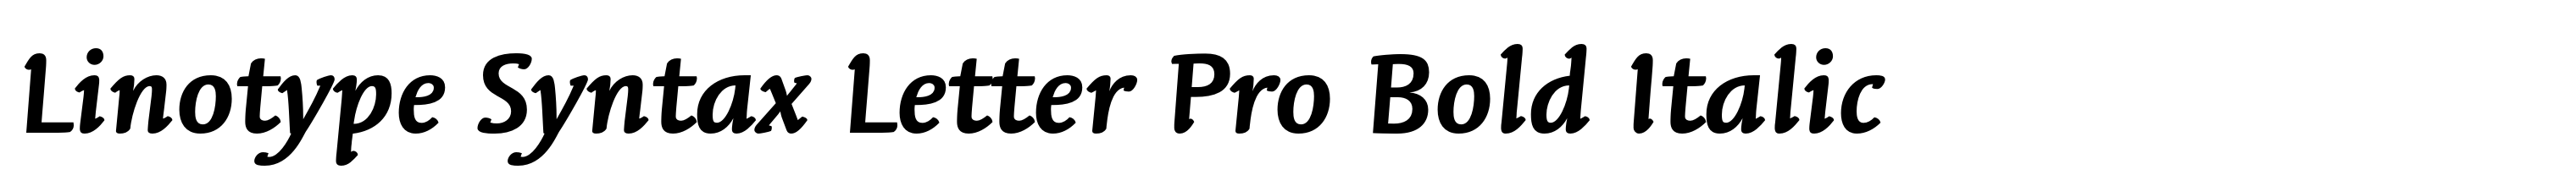 Linotype Syntax Letter Pro Bold Italic